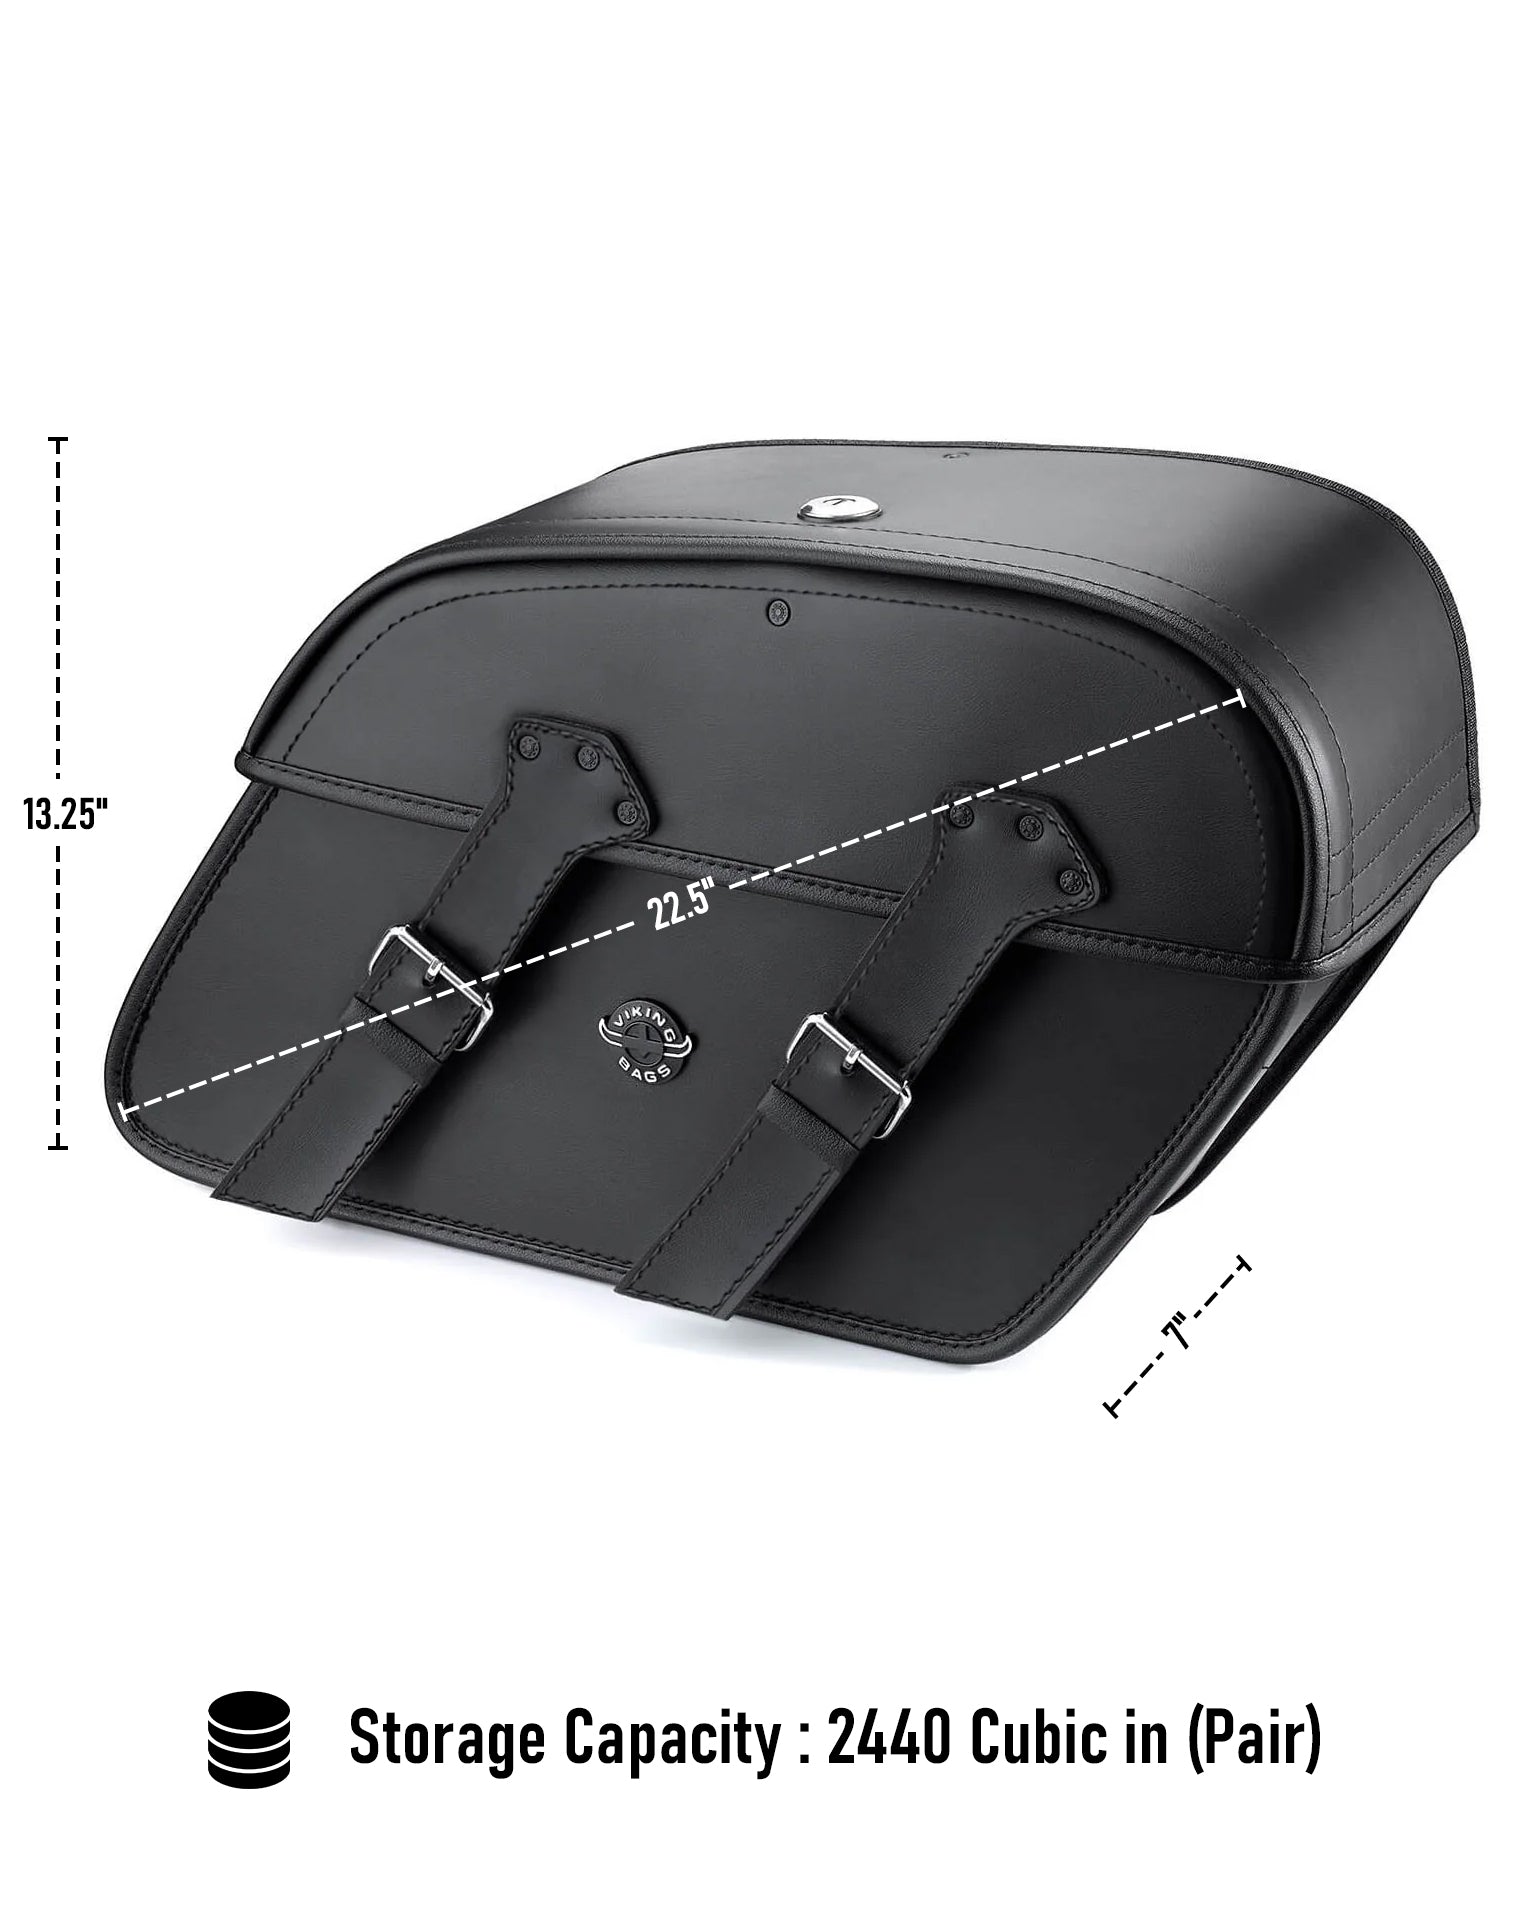 Viking Raven Extra Large Yamaha V Star 650 Classic Xvs65A Leather Motorcycle Saddlebags Can Store Your Ridings Gears